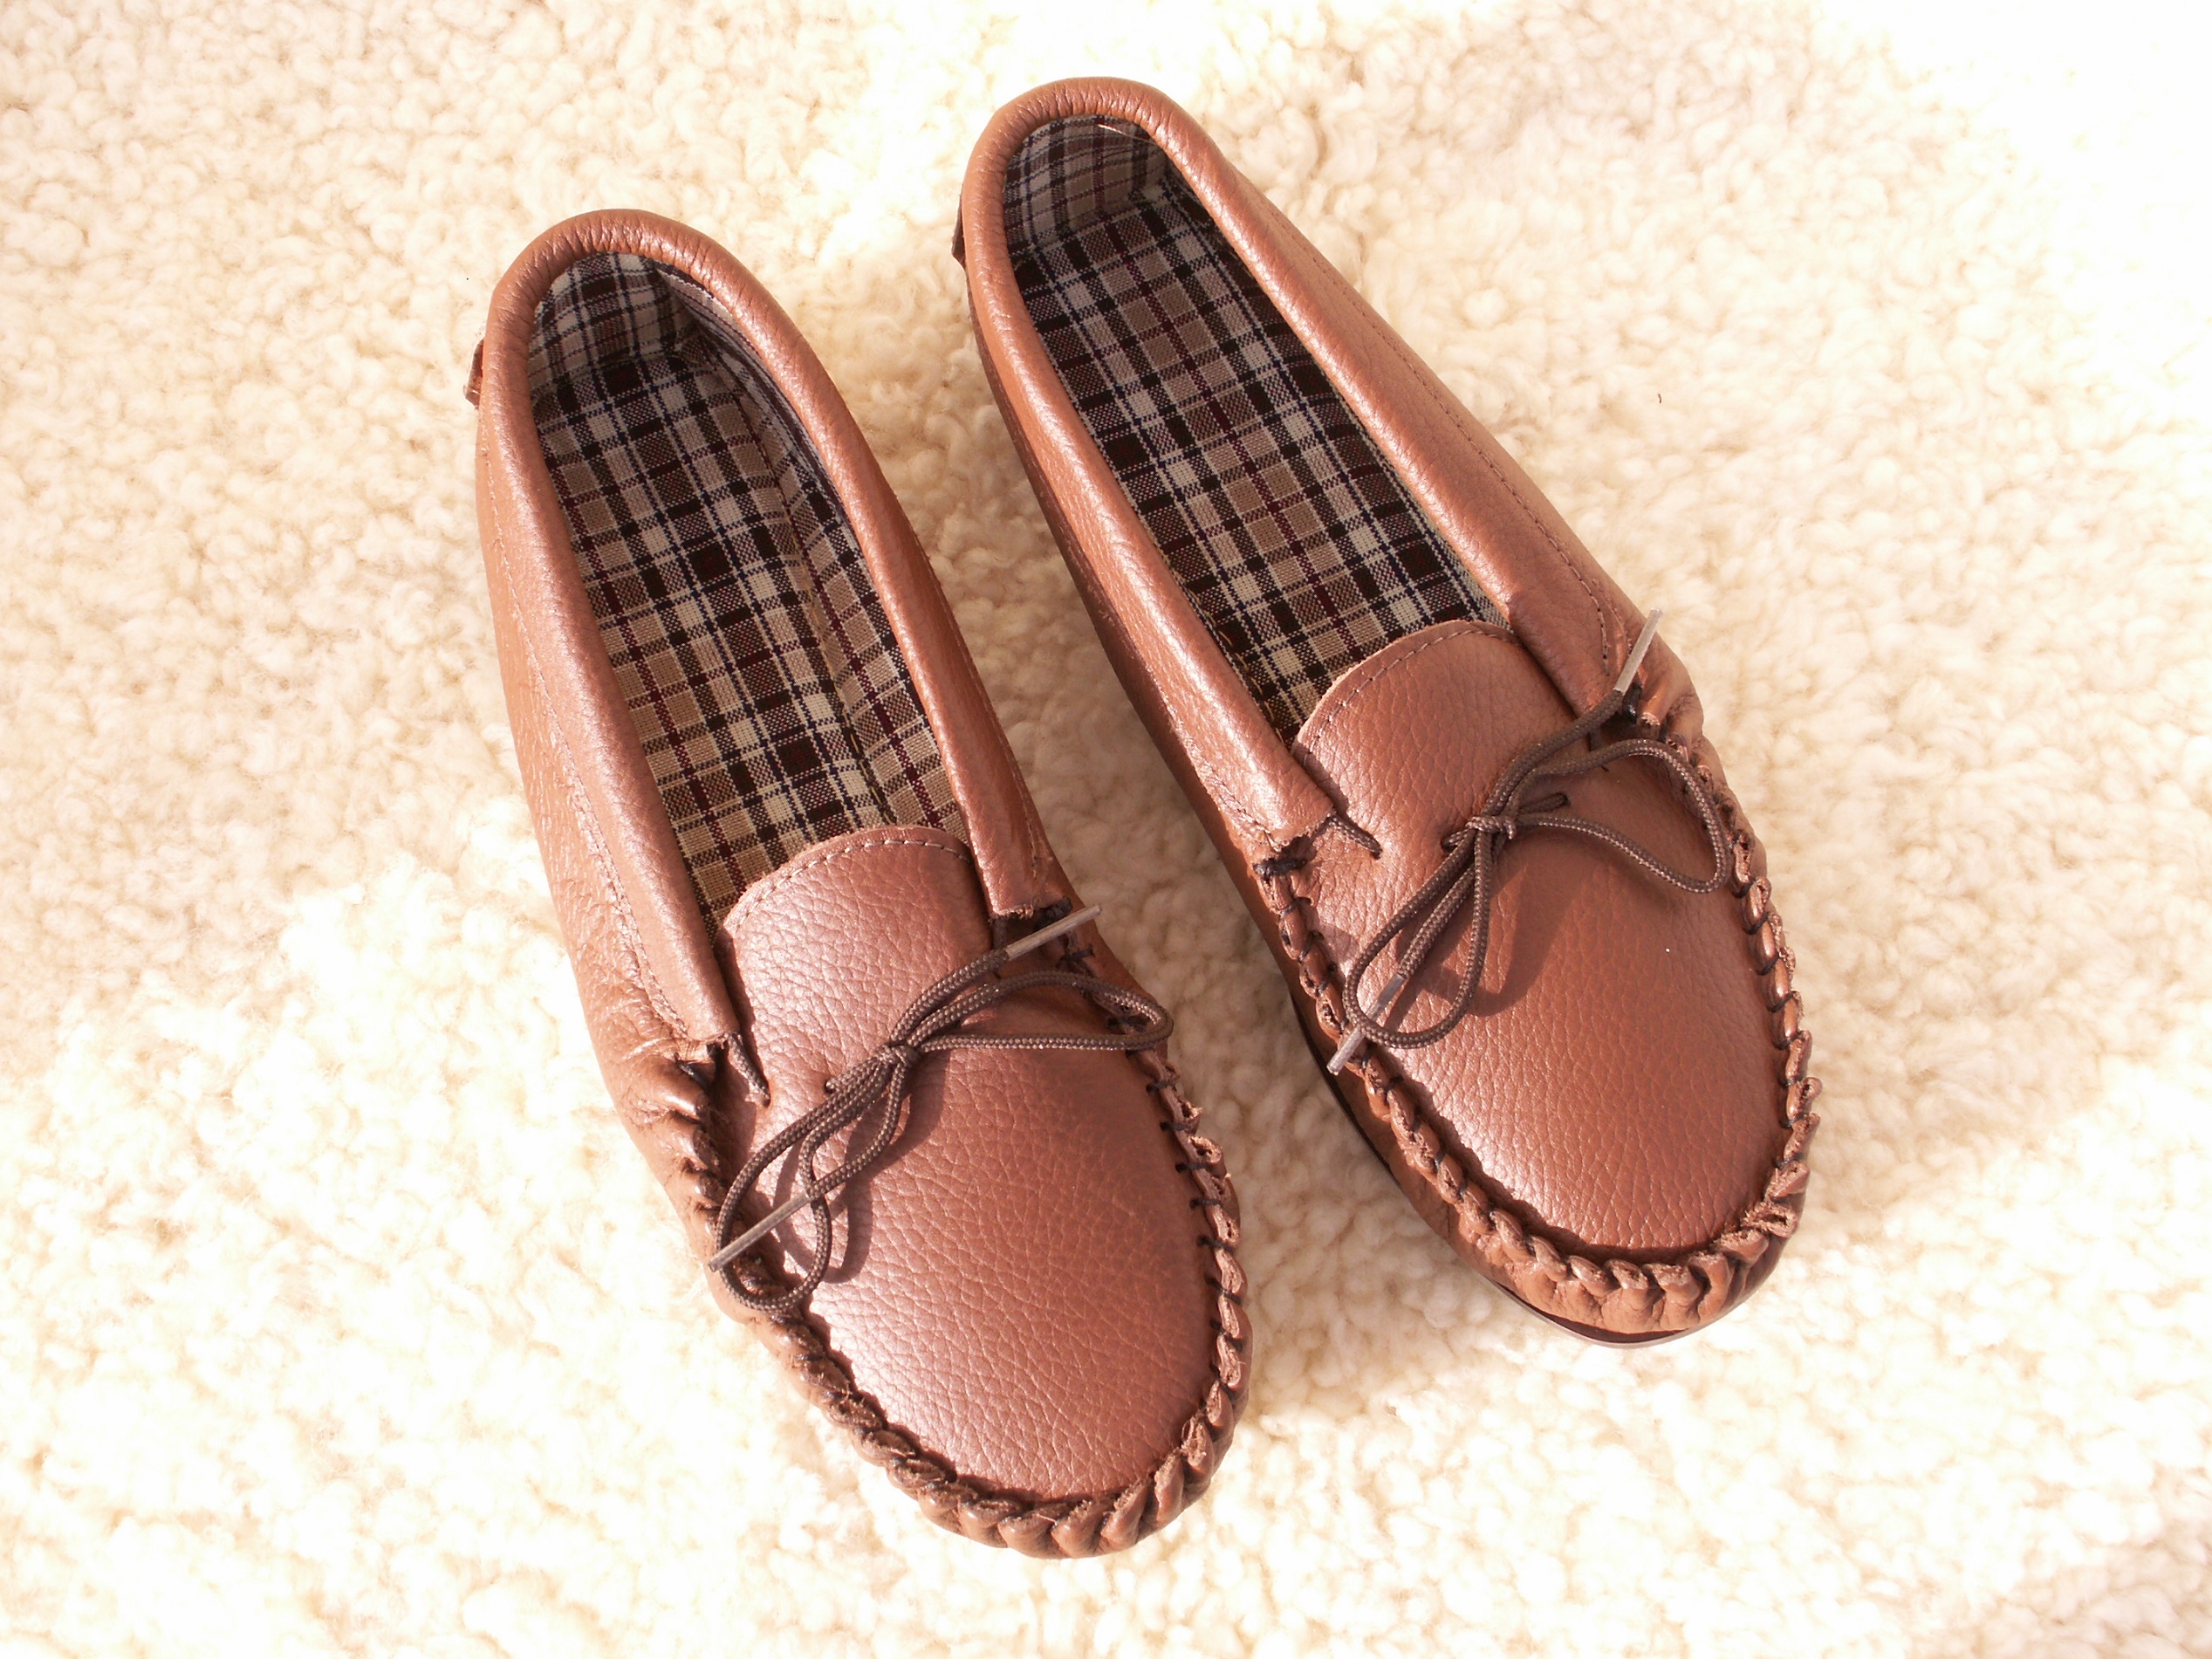 mens leather moccasin slippers